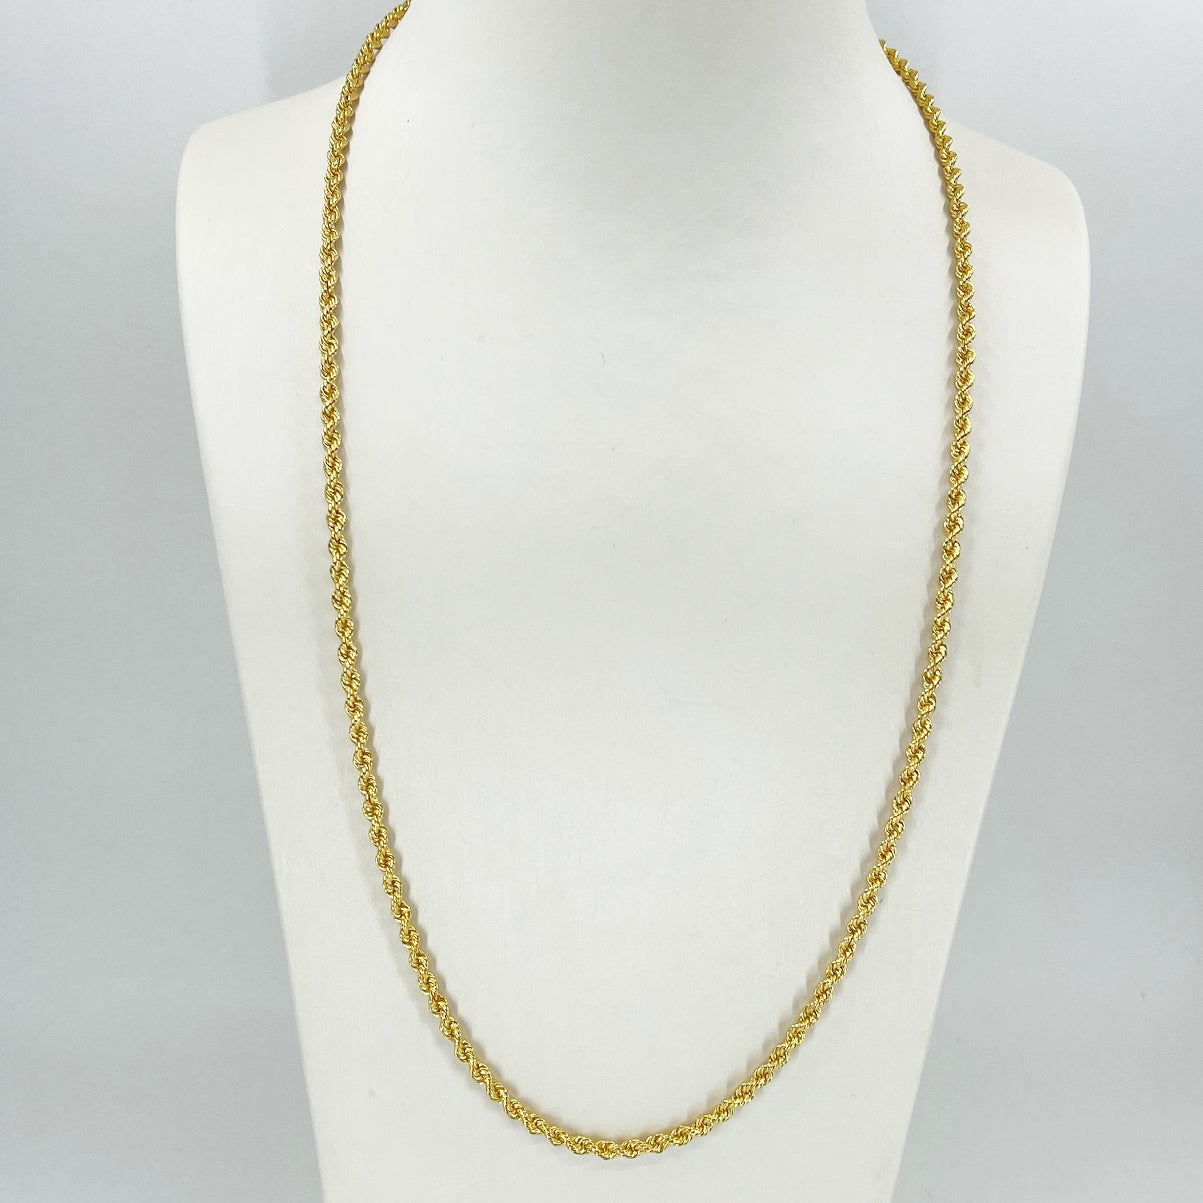 24K Solid Yellow Gold Rope Chain 39.4 Grams 24